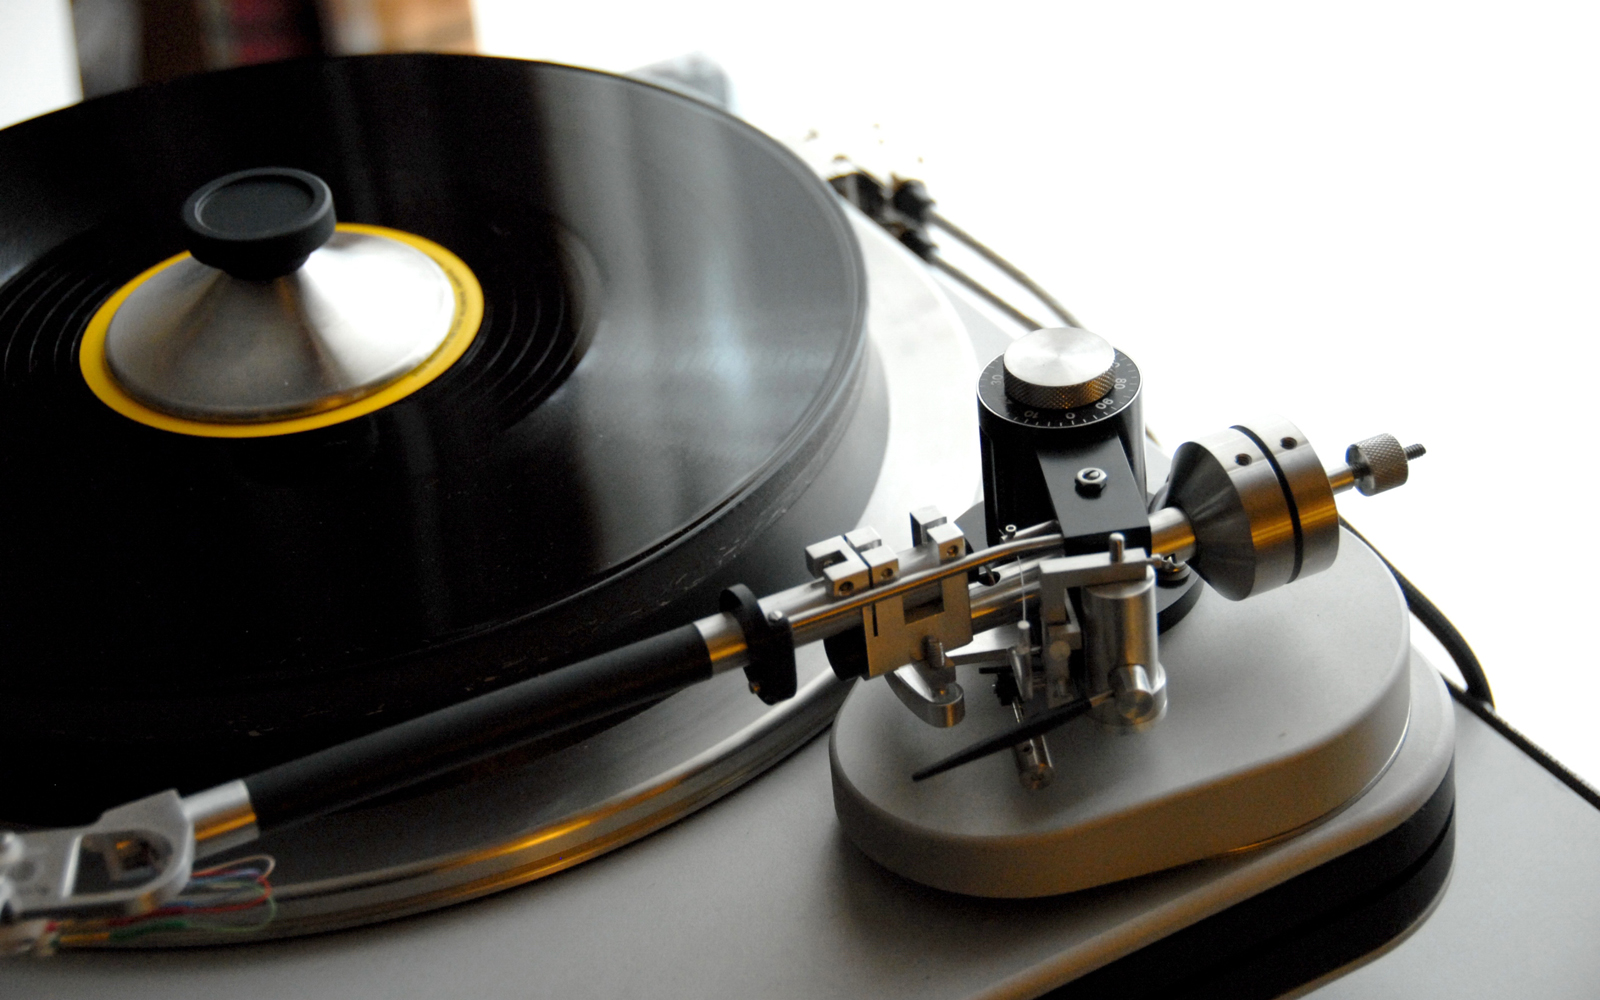 Turntable Record Player HD Wallpaper Image To